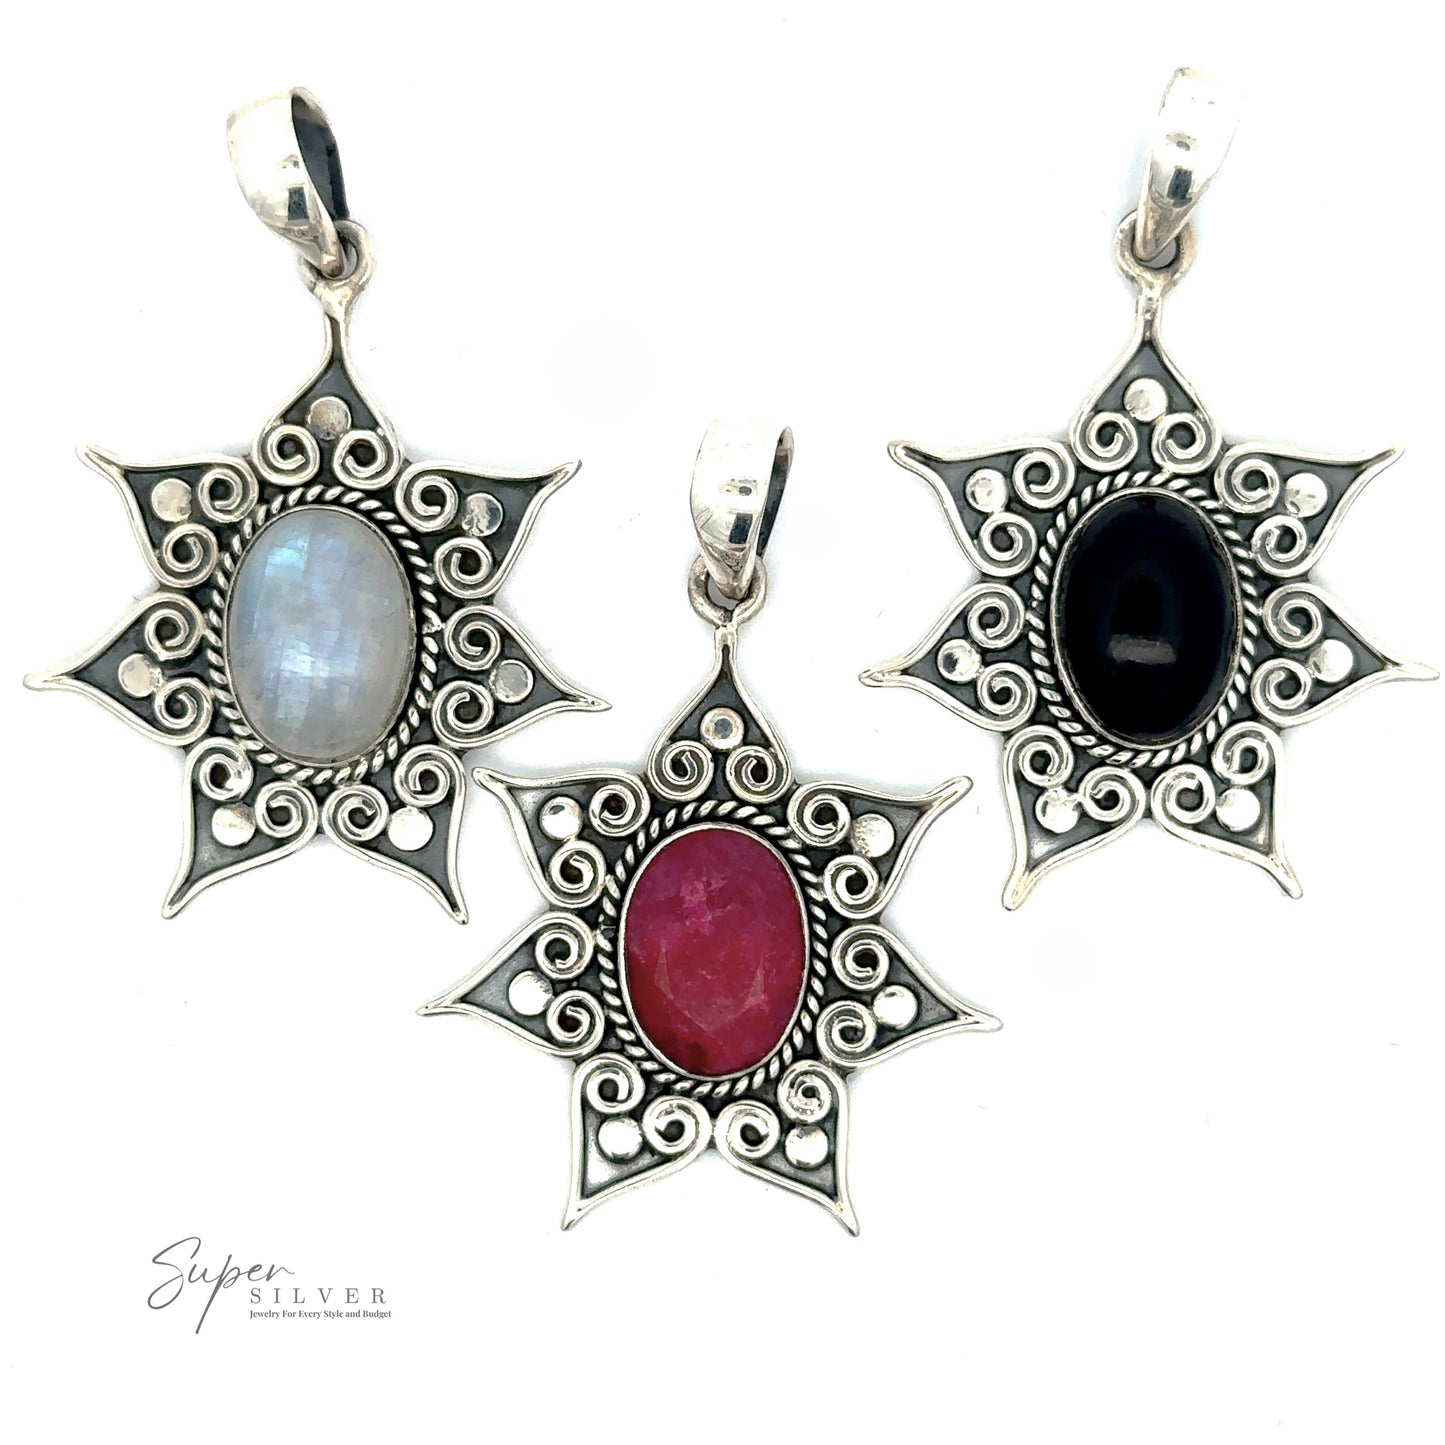 Three Floral Design Gemstone Pendants with ornate designs and central gemstones: a blue moonstone, a black onyx, and a red ruby, displayed against a white background.